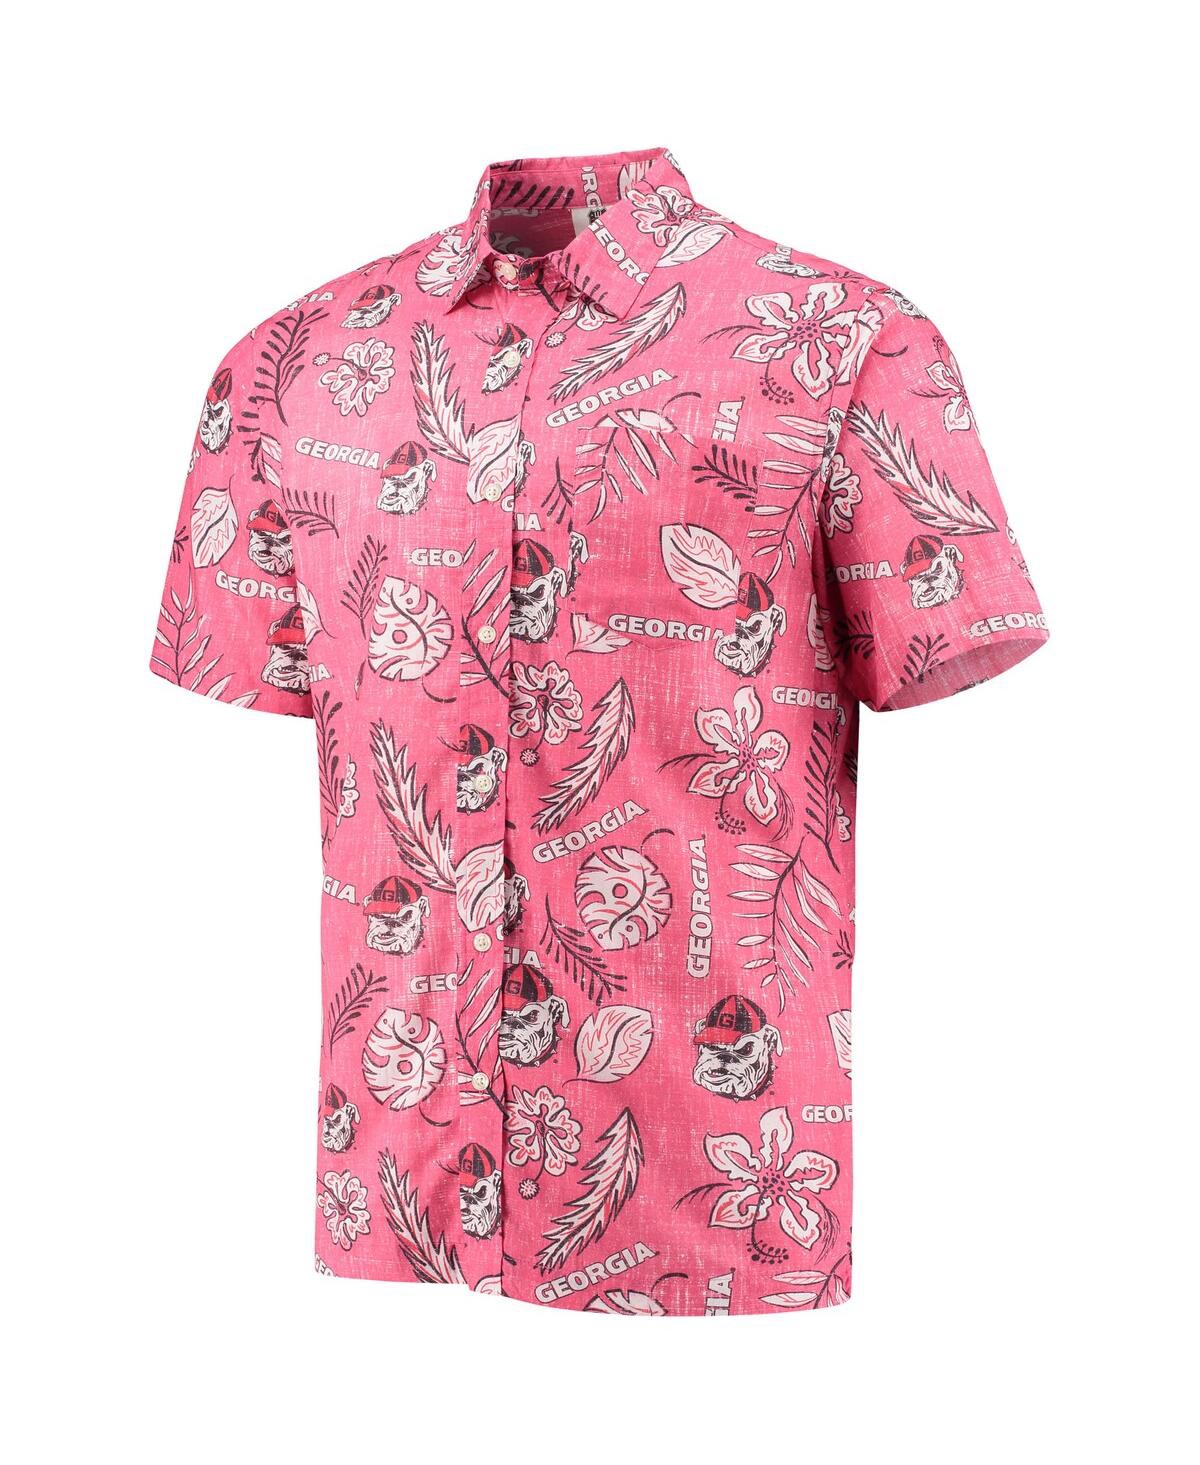 Shop Wes & Willy Men's  Red Distressed Georgia Bulldogs Vintage-like Floral Button-up Shirt